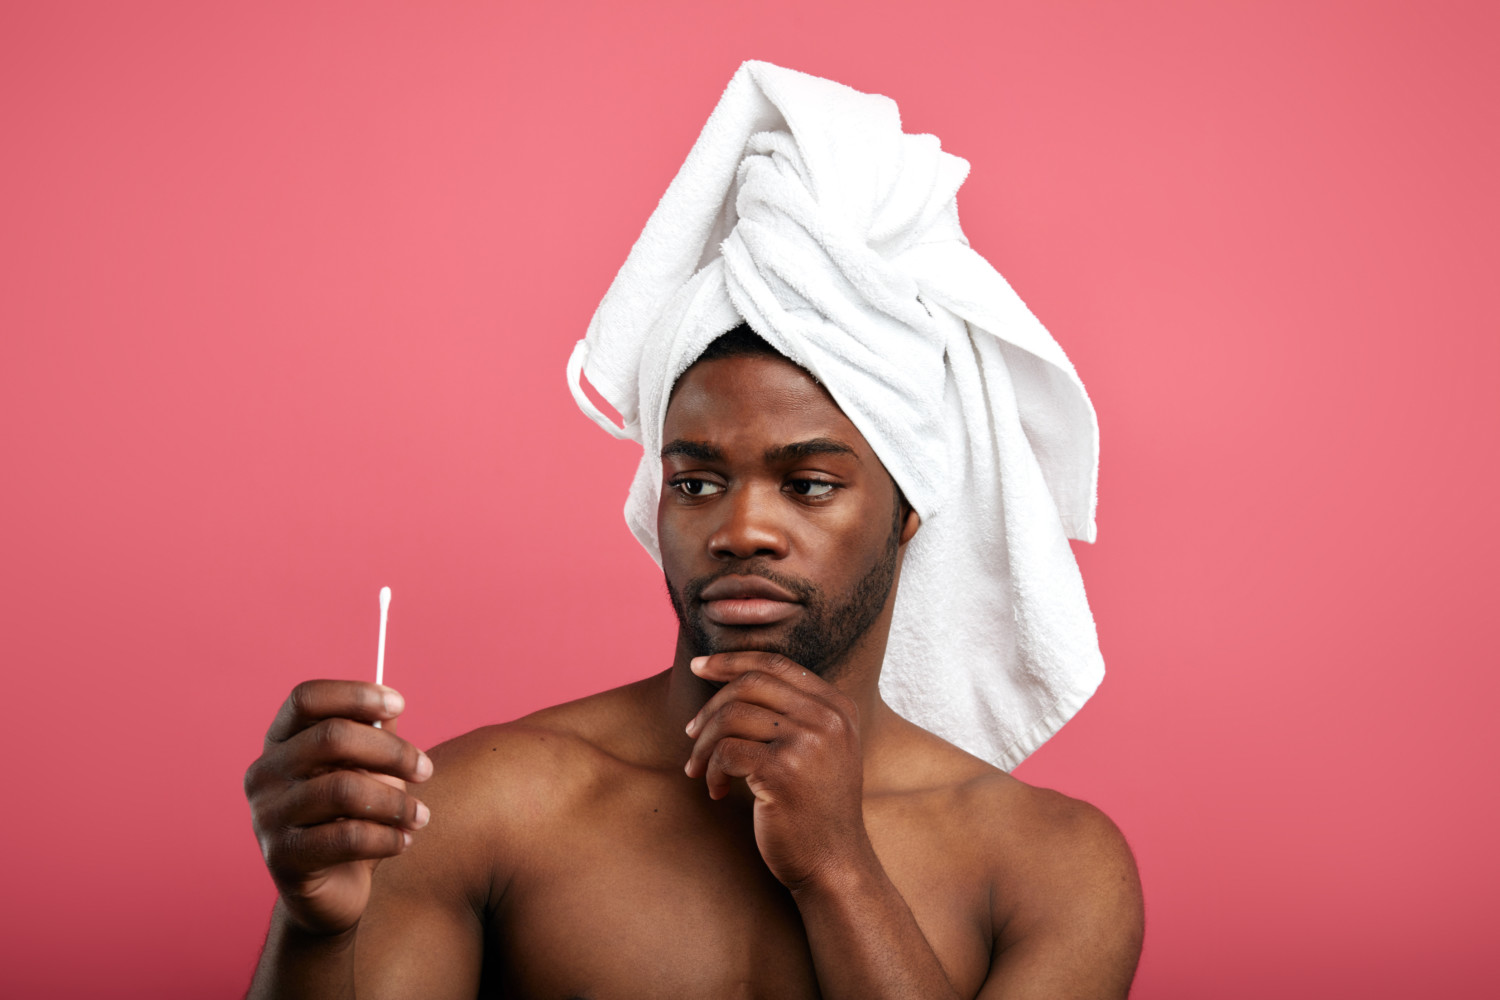 Man questions whether to use Q-tip